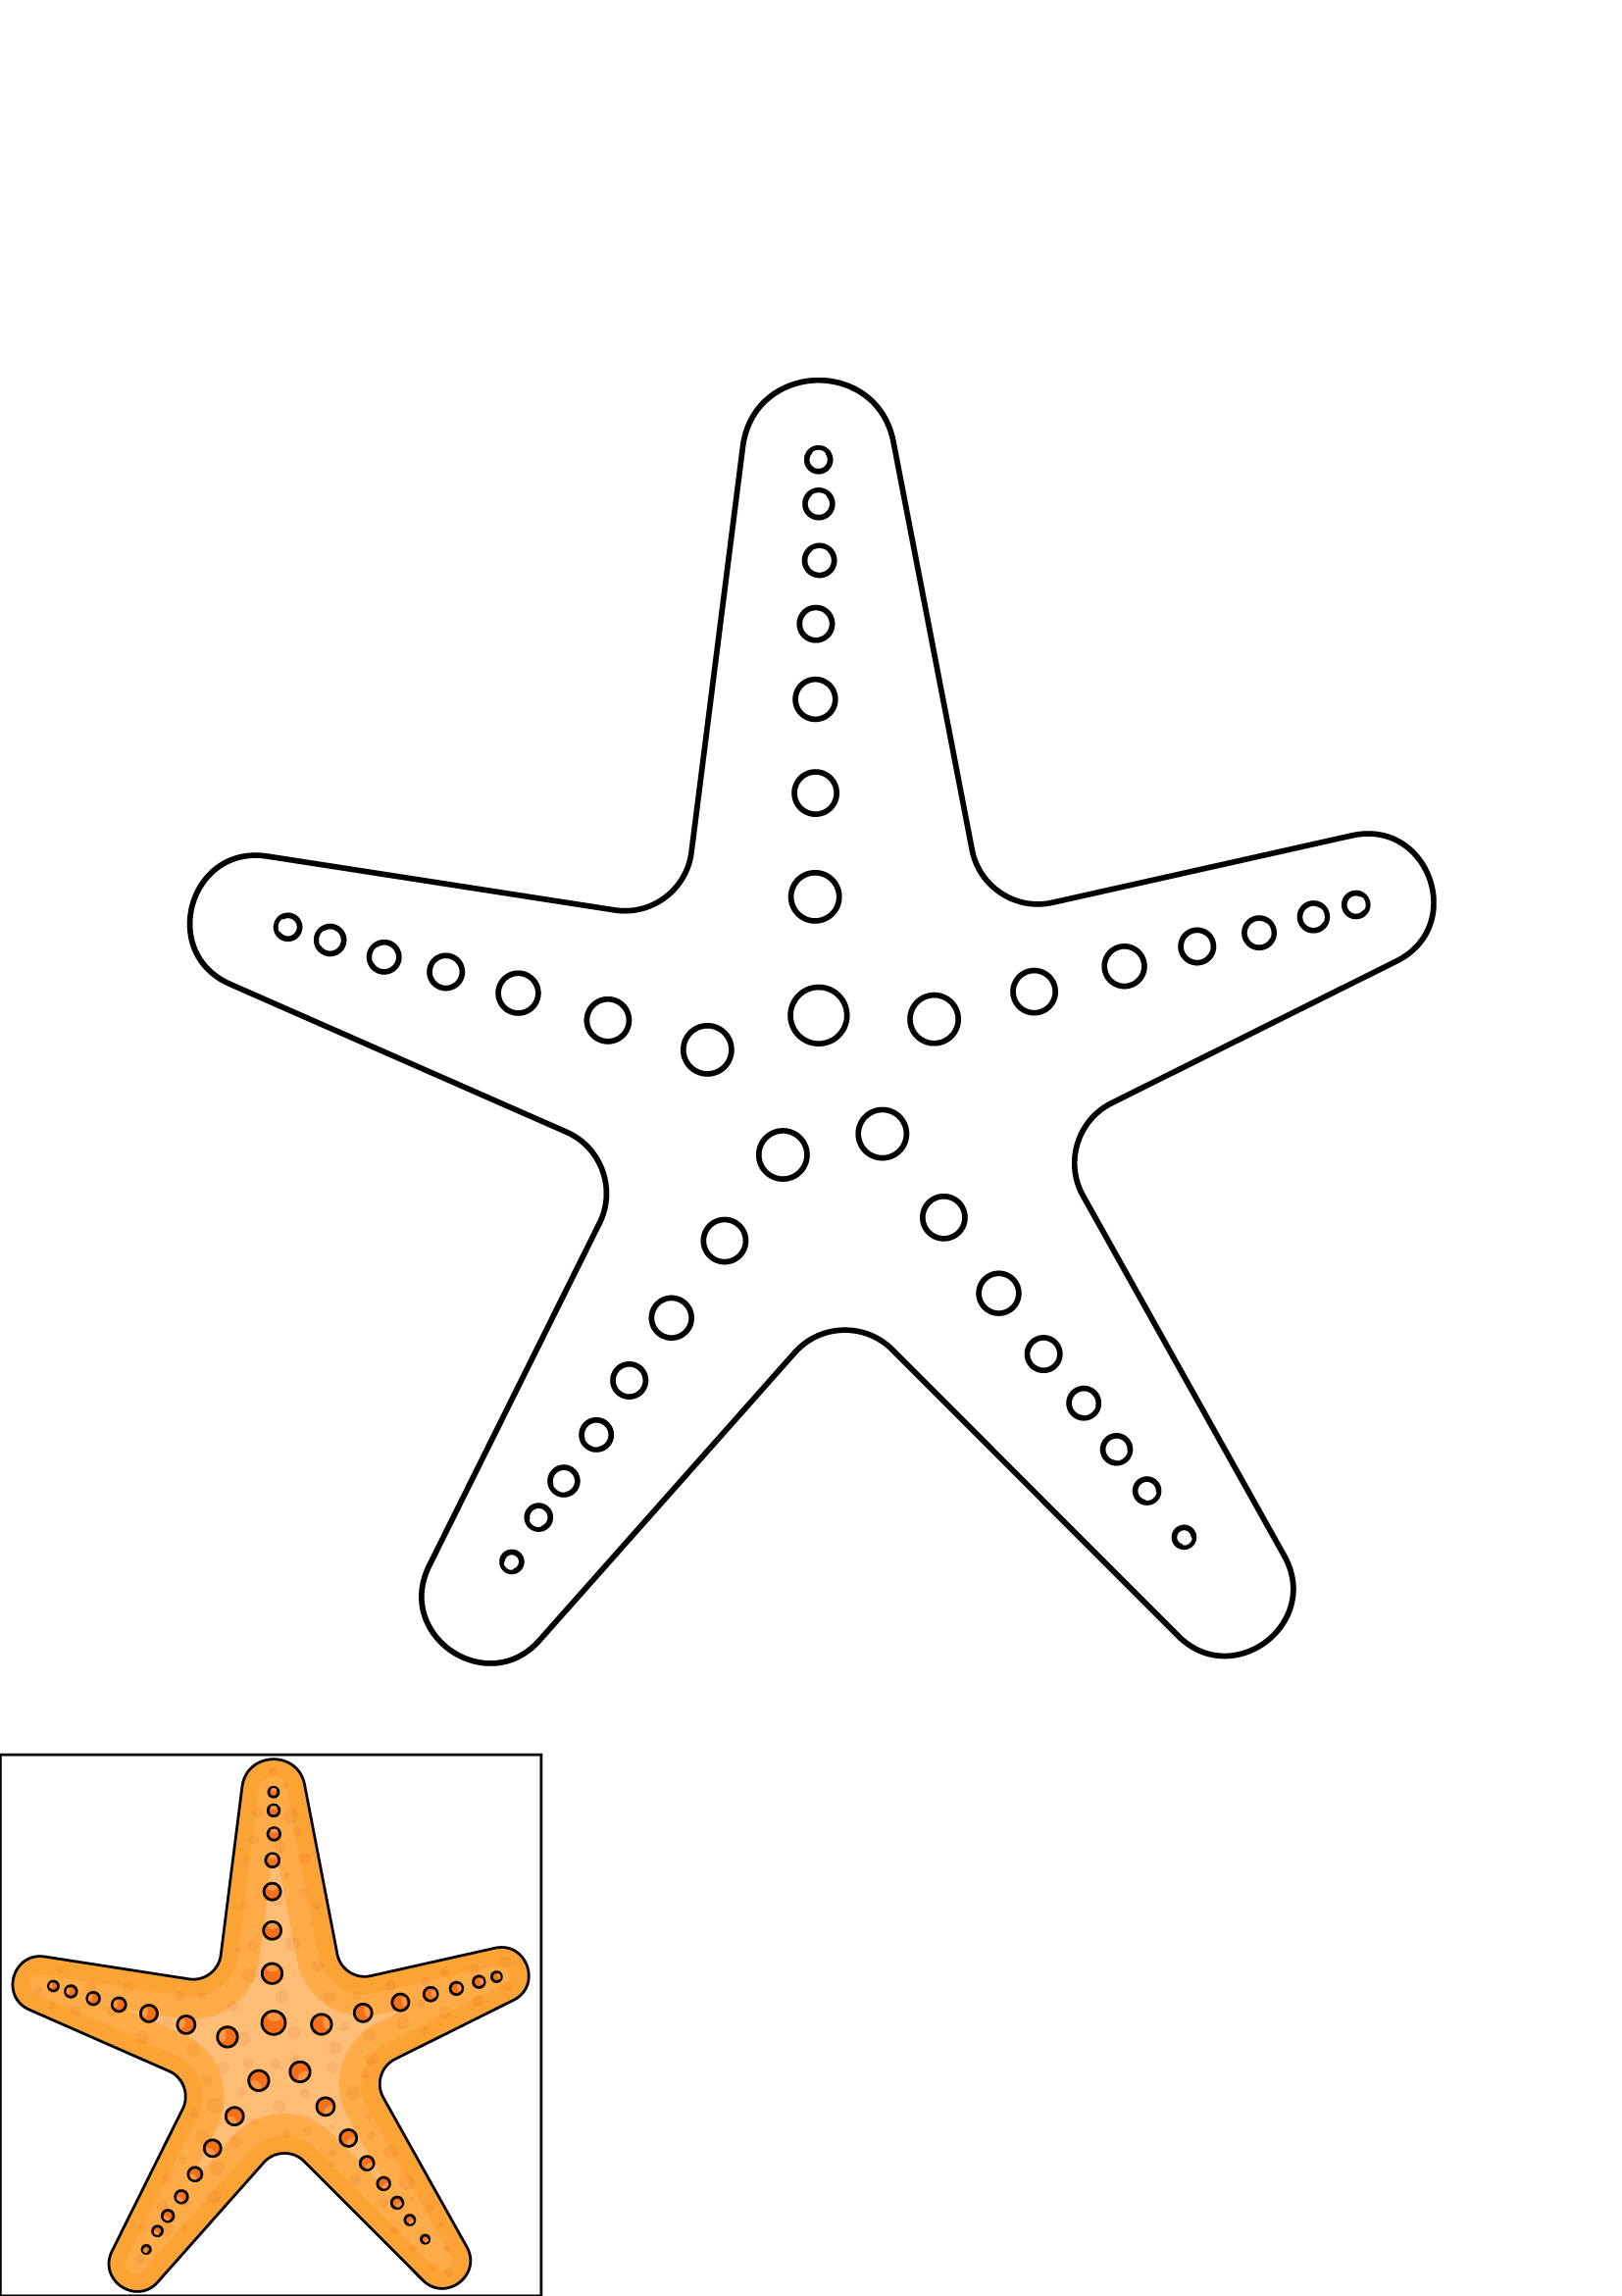 How to Draw A Sea Star Step by Step Printable Color